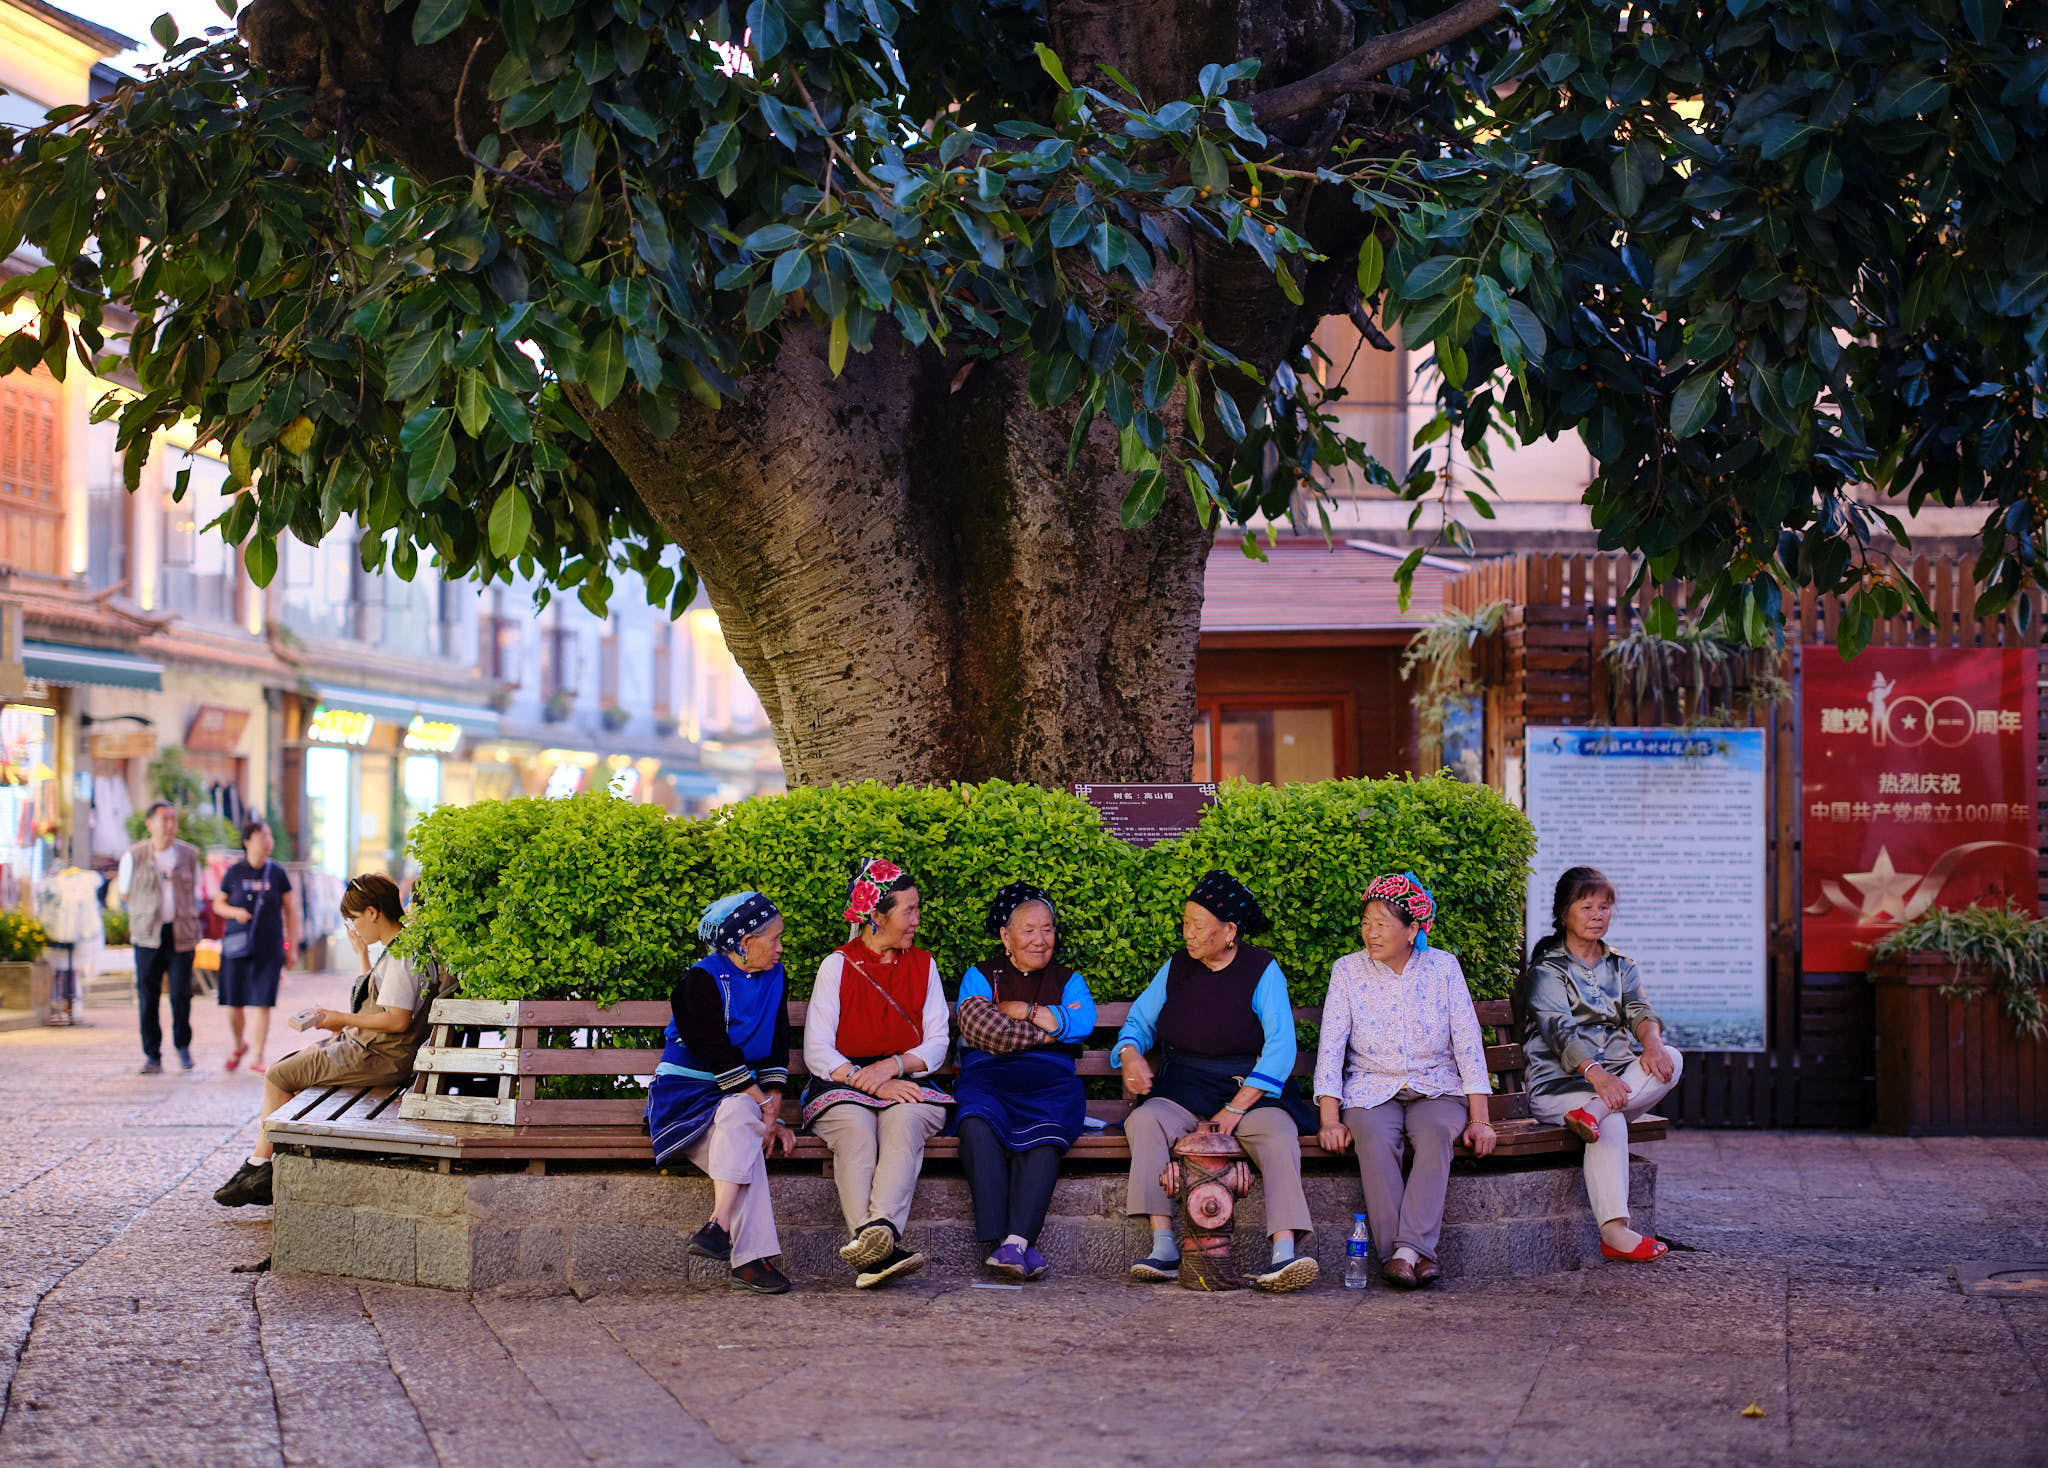 Local ethnic minorities ladies hanging out under a tree in central square Shuanglang